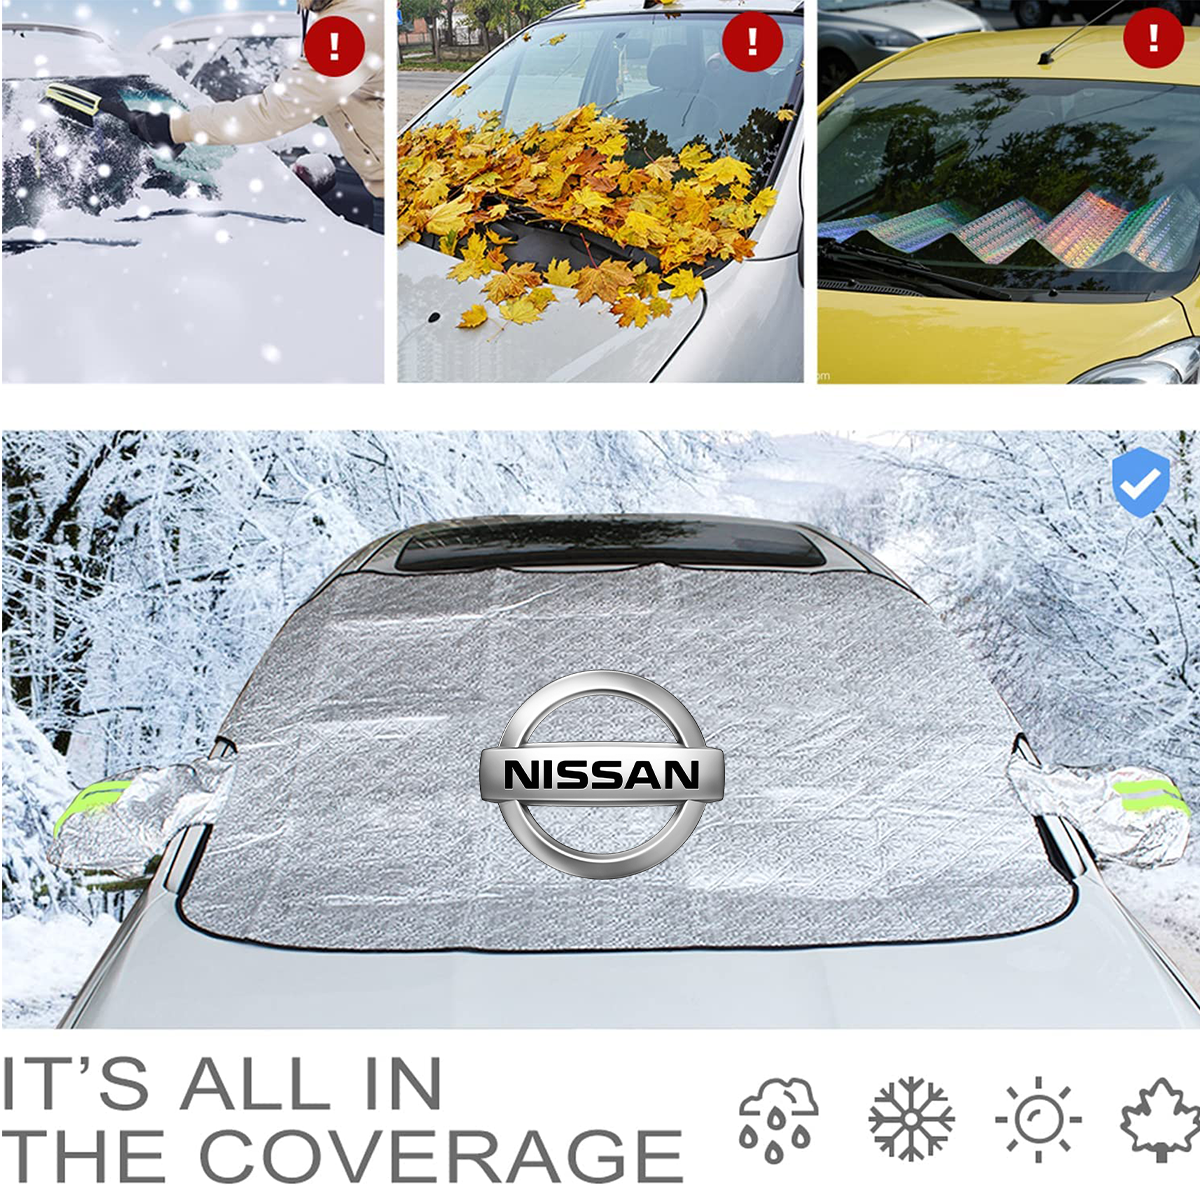 Windshield Cover for Ice and Snow, Custom fit for car, Magnetic Windshield Cover, Water, Heat & Sag-Proof Car Windshield Snow Cover, Mirror Protector Windproof Sunshade Cover